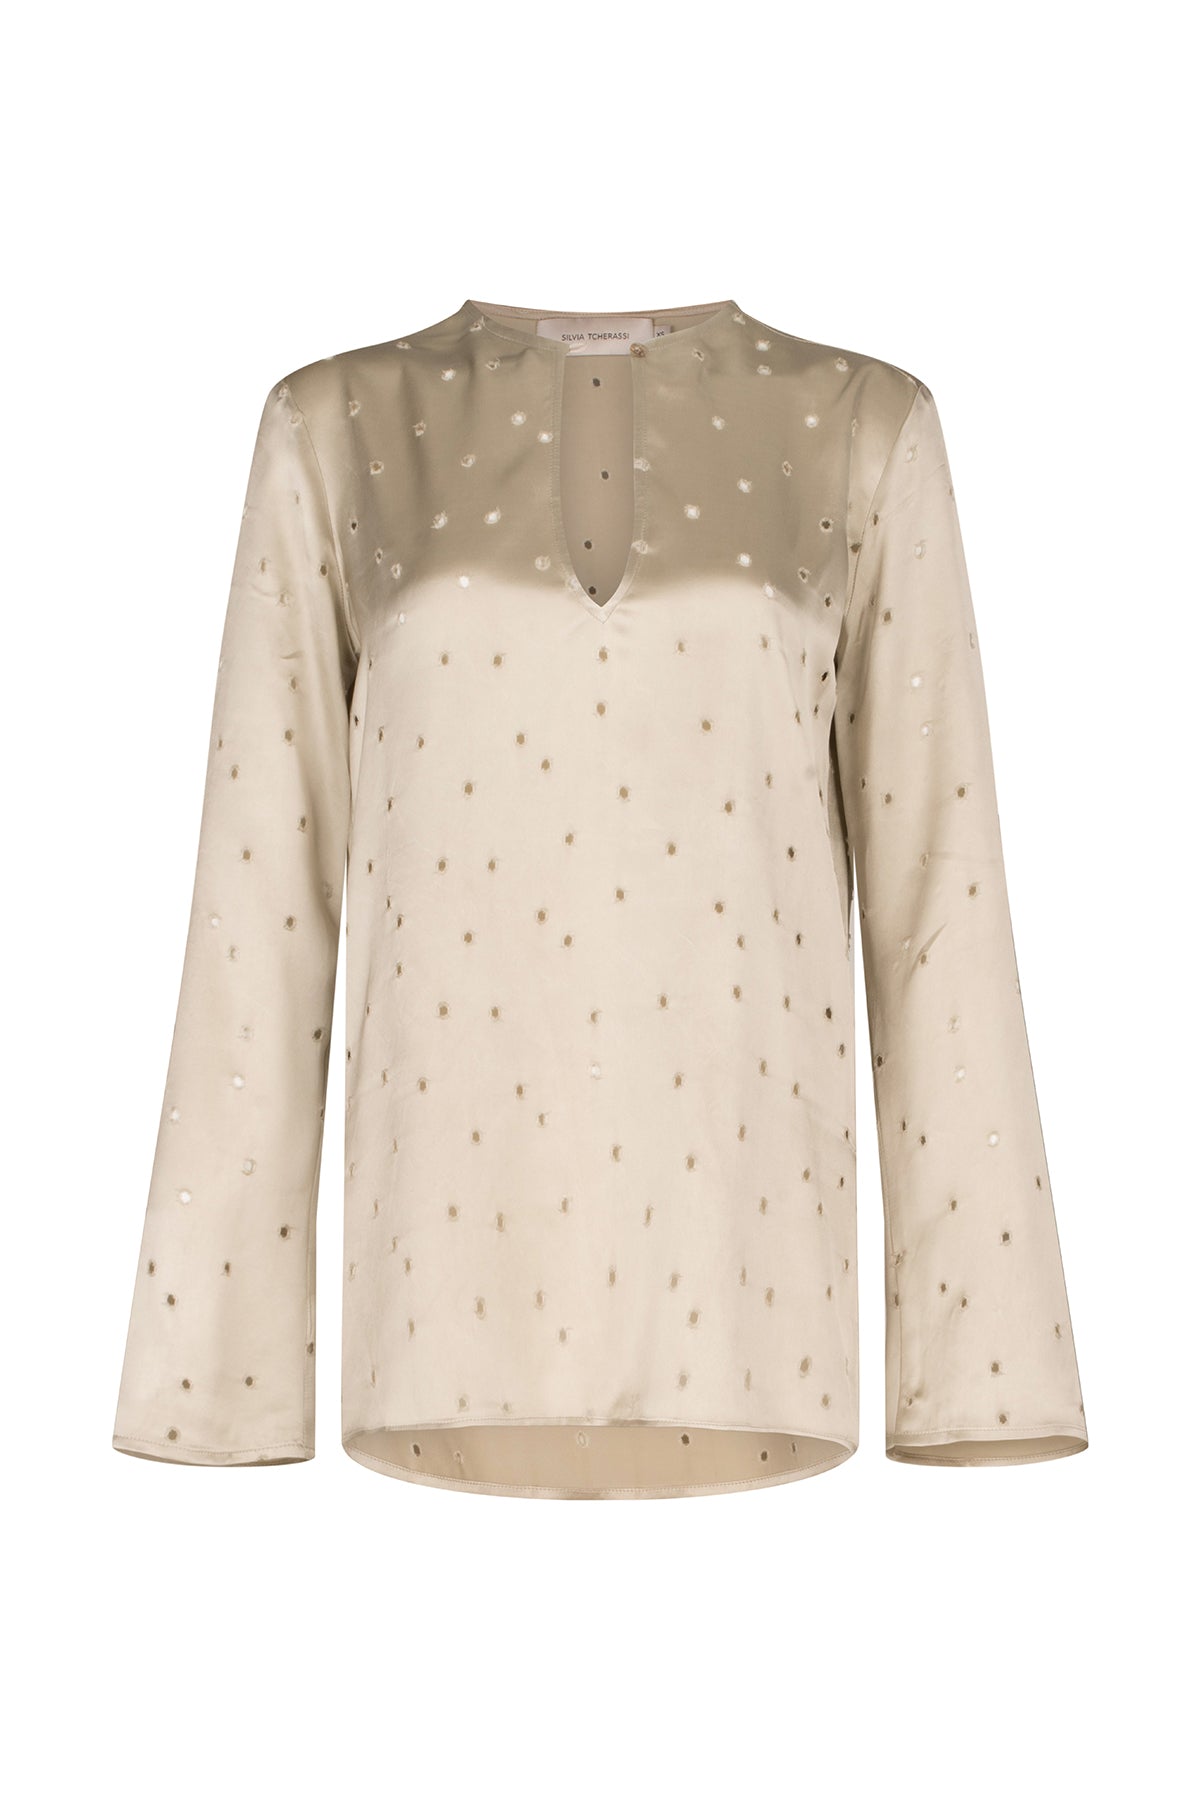 A Tosca Blouse Ecru with a keyhole neckline and gold stars on the fabric texture.